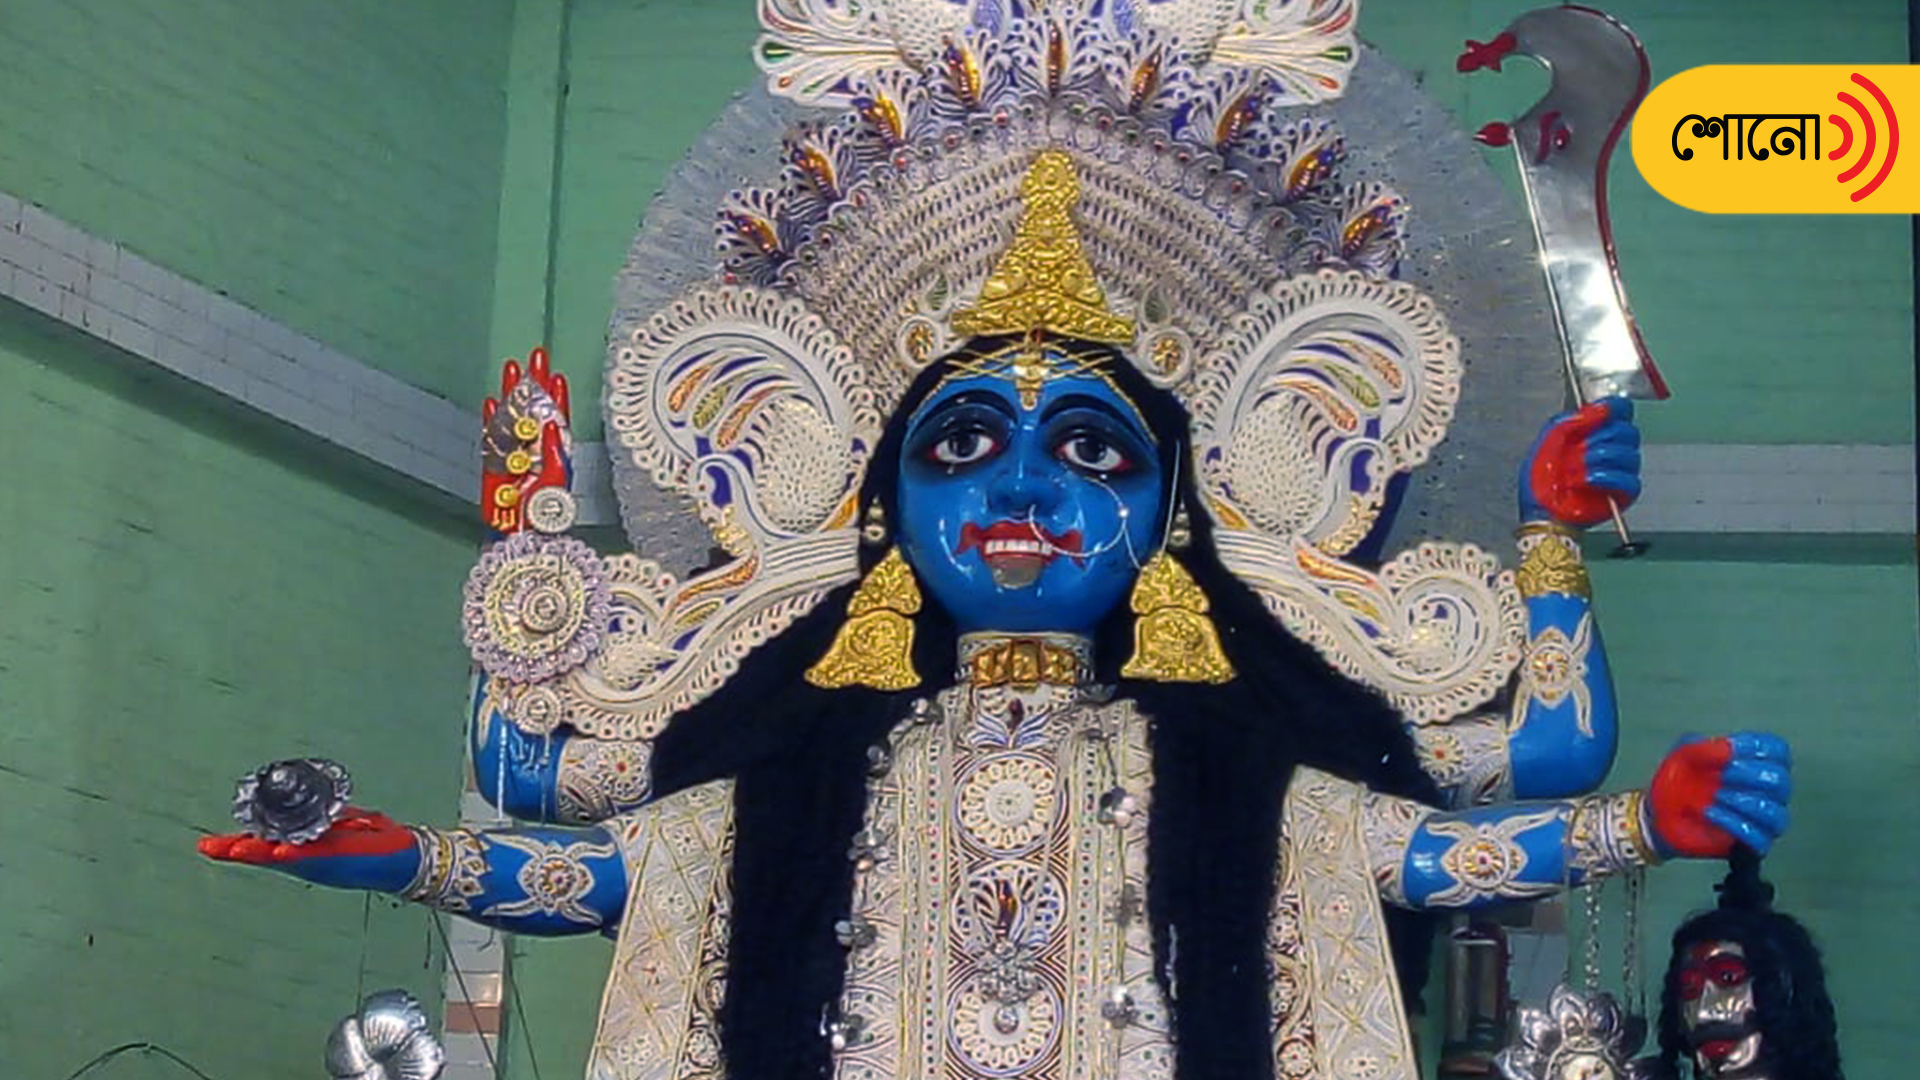 Listen to the story behind the Pathuria Ghata Kali Puja